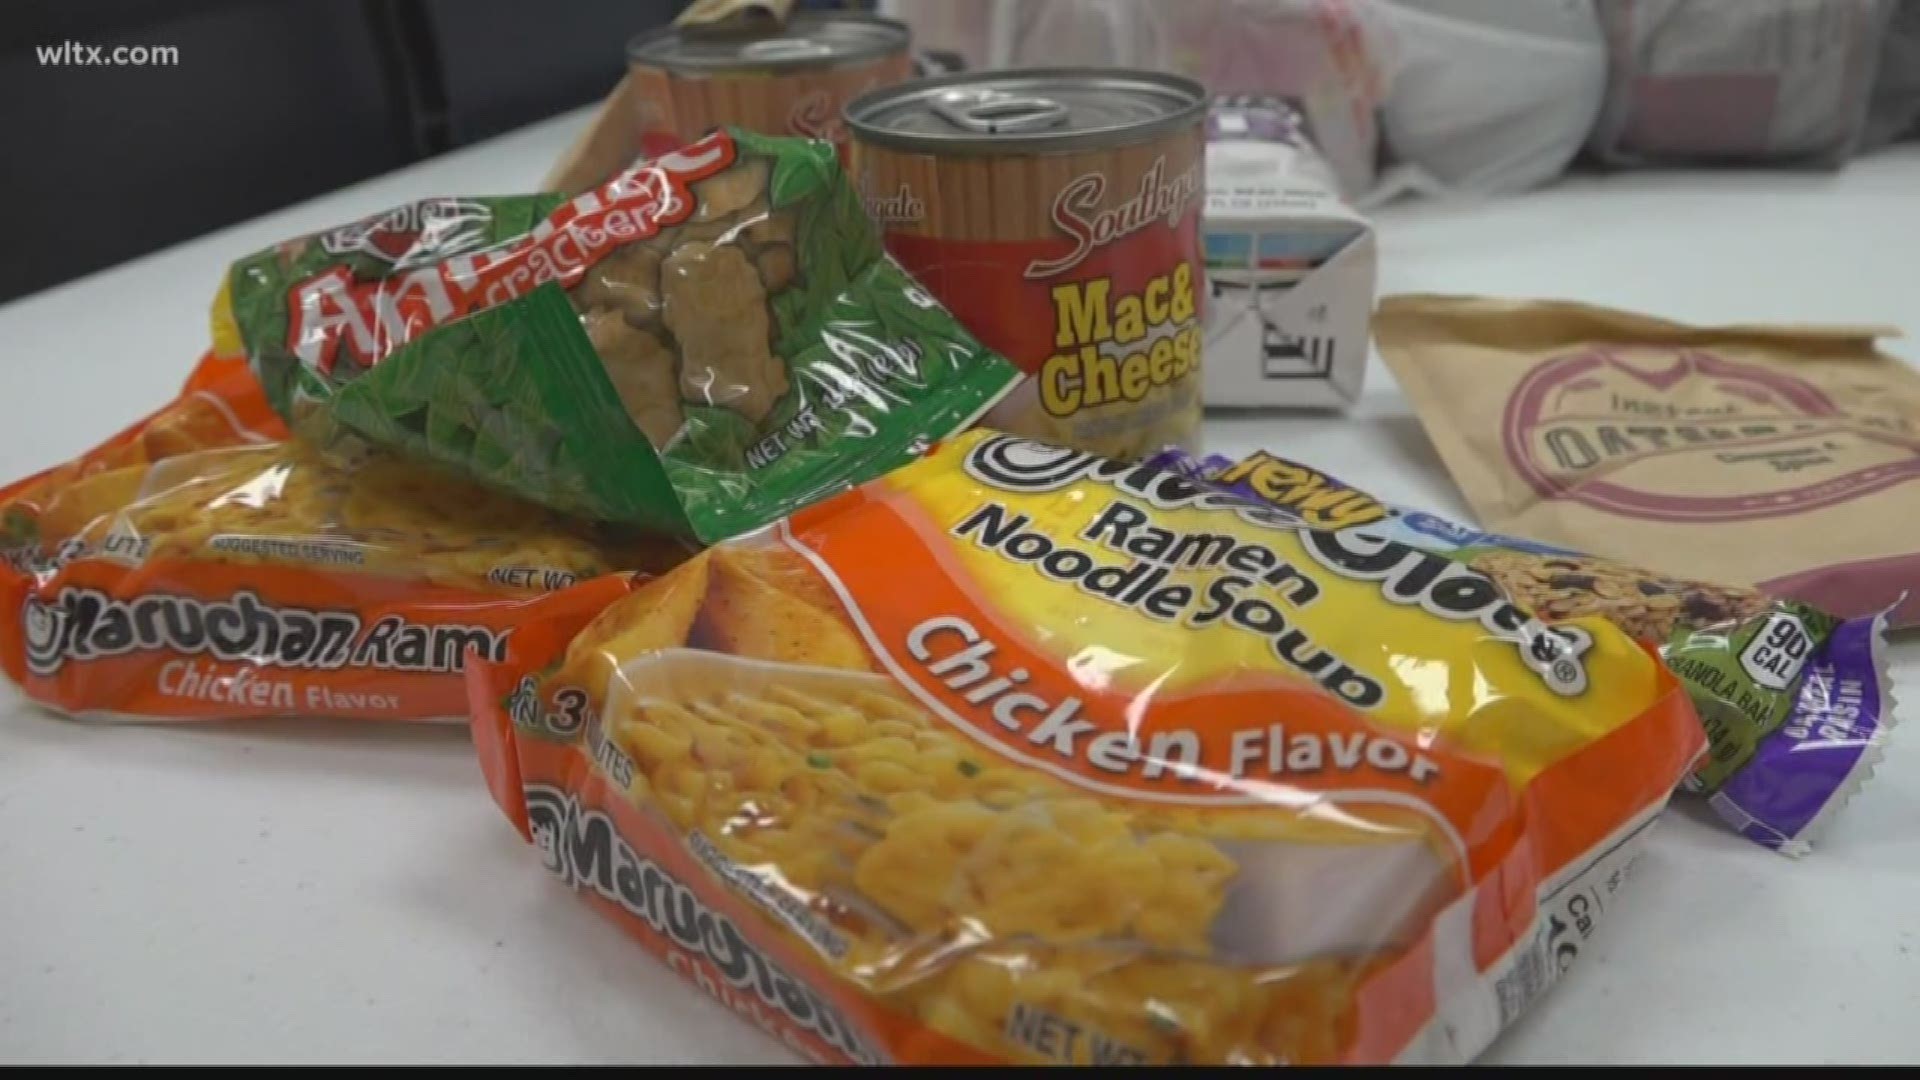 Each week, Lexington United Methodist Church sends out over 500 "snack sacks" to schools in the community.